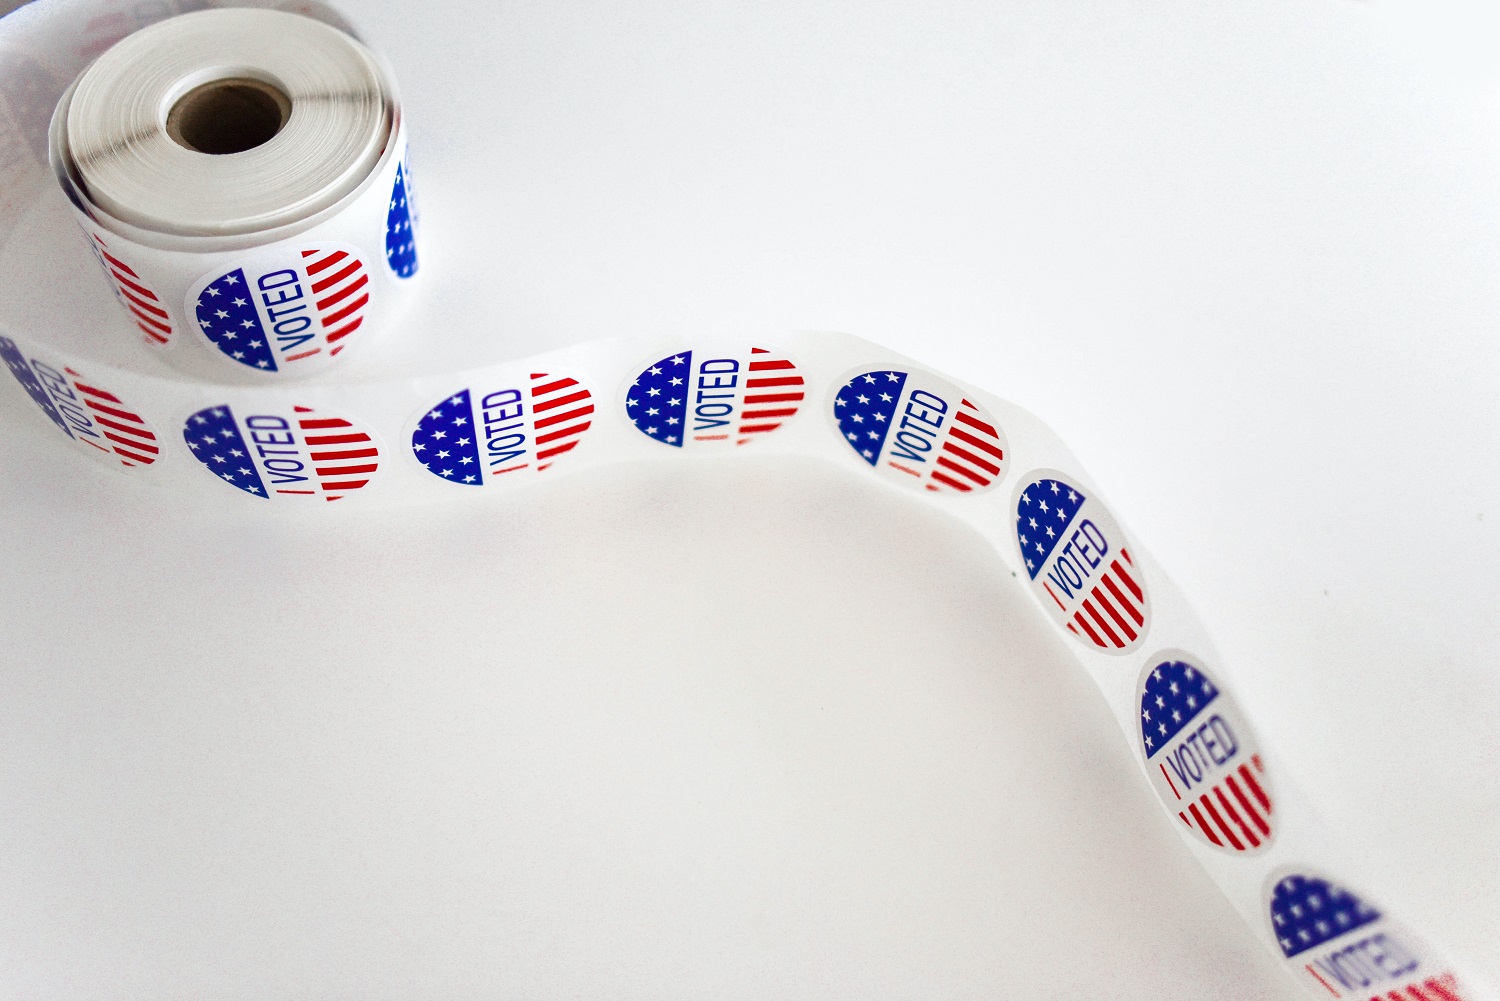 Photo of a roll of "I Voted" stickers